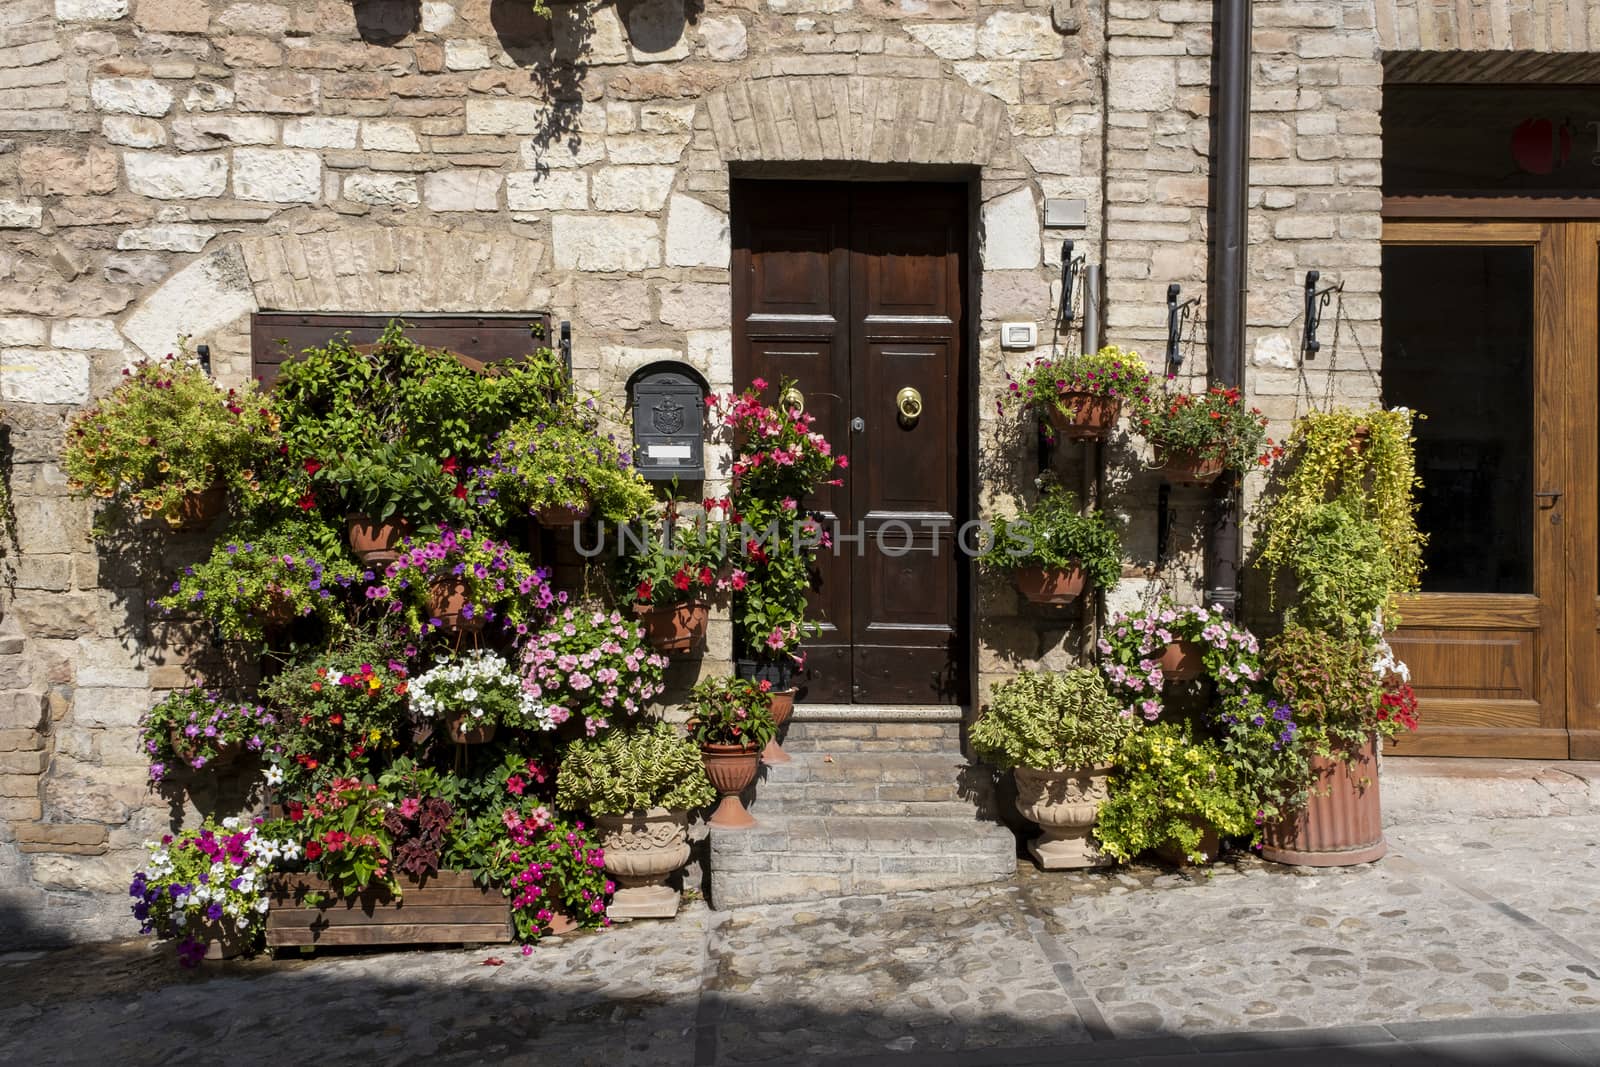 Colorful flowers outside a home in the Italian hill town of Assisi, italy